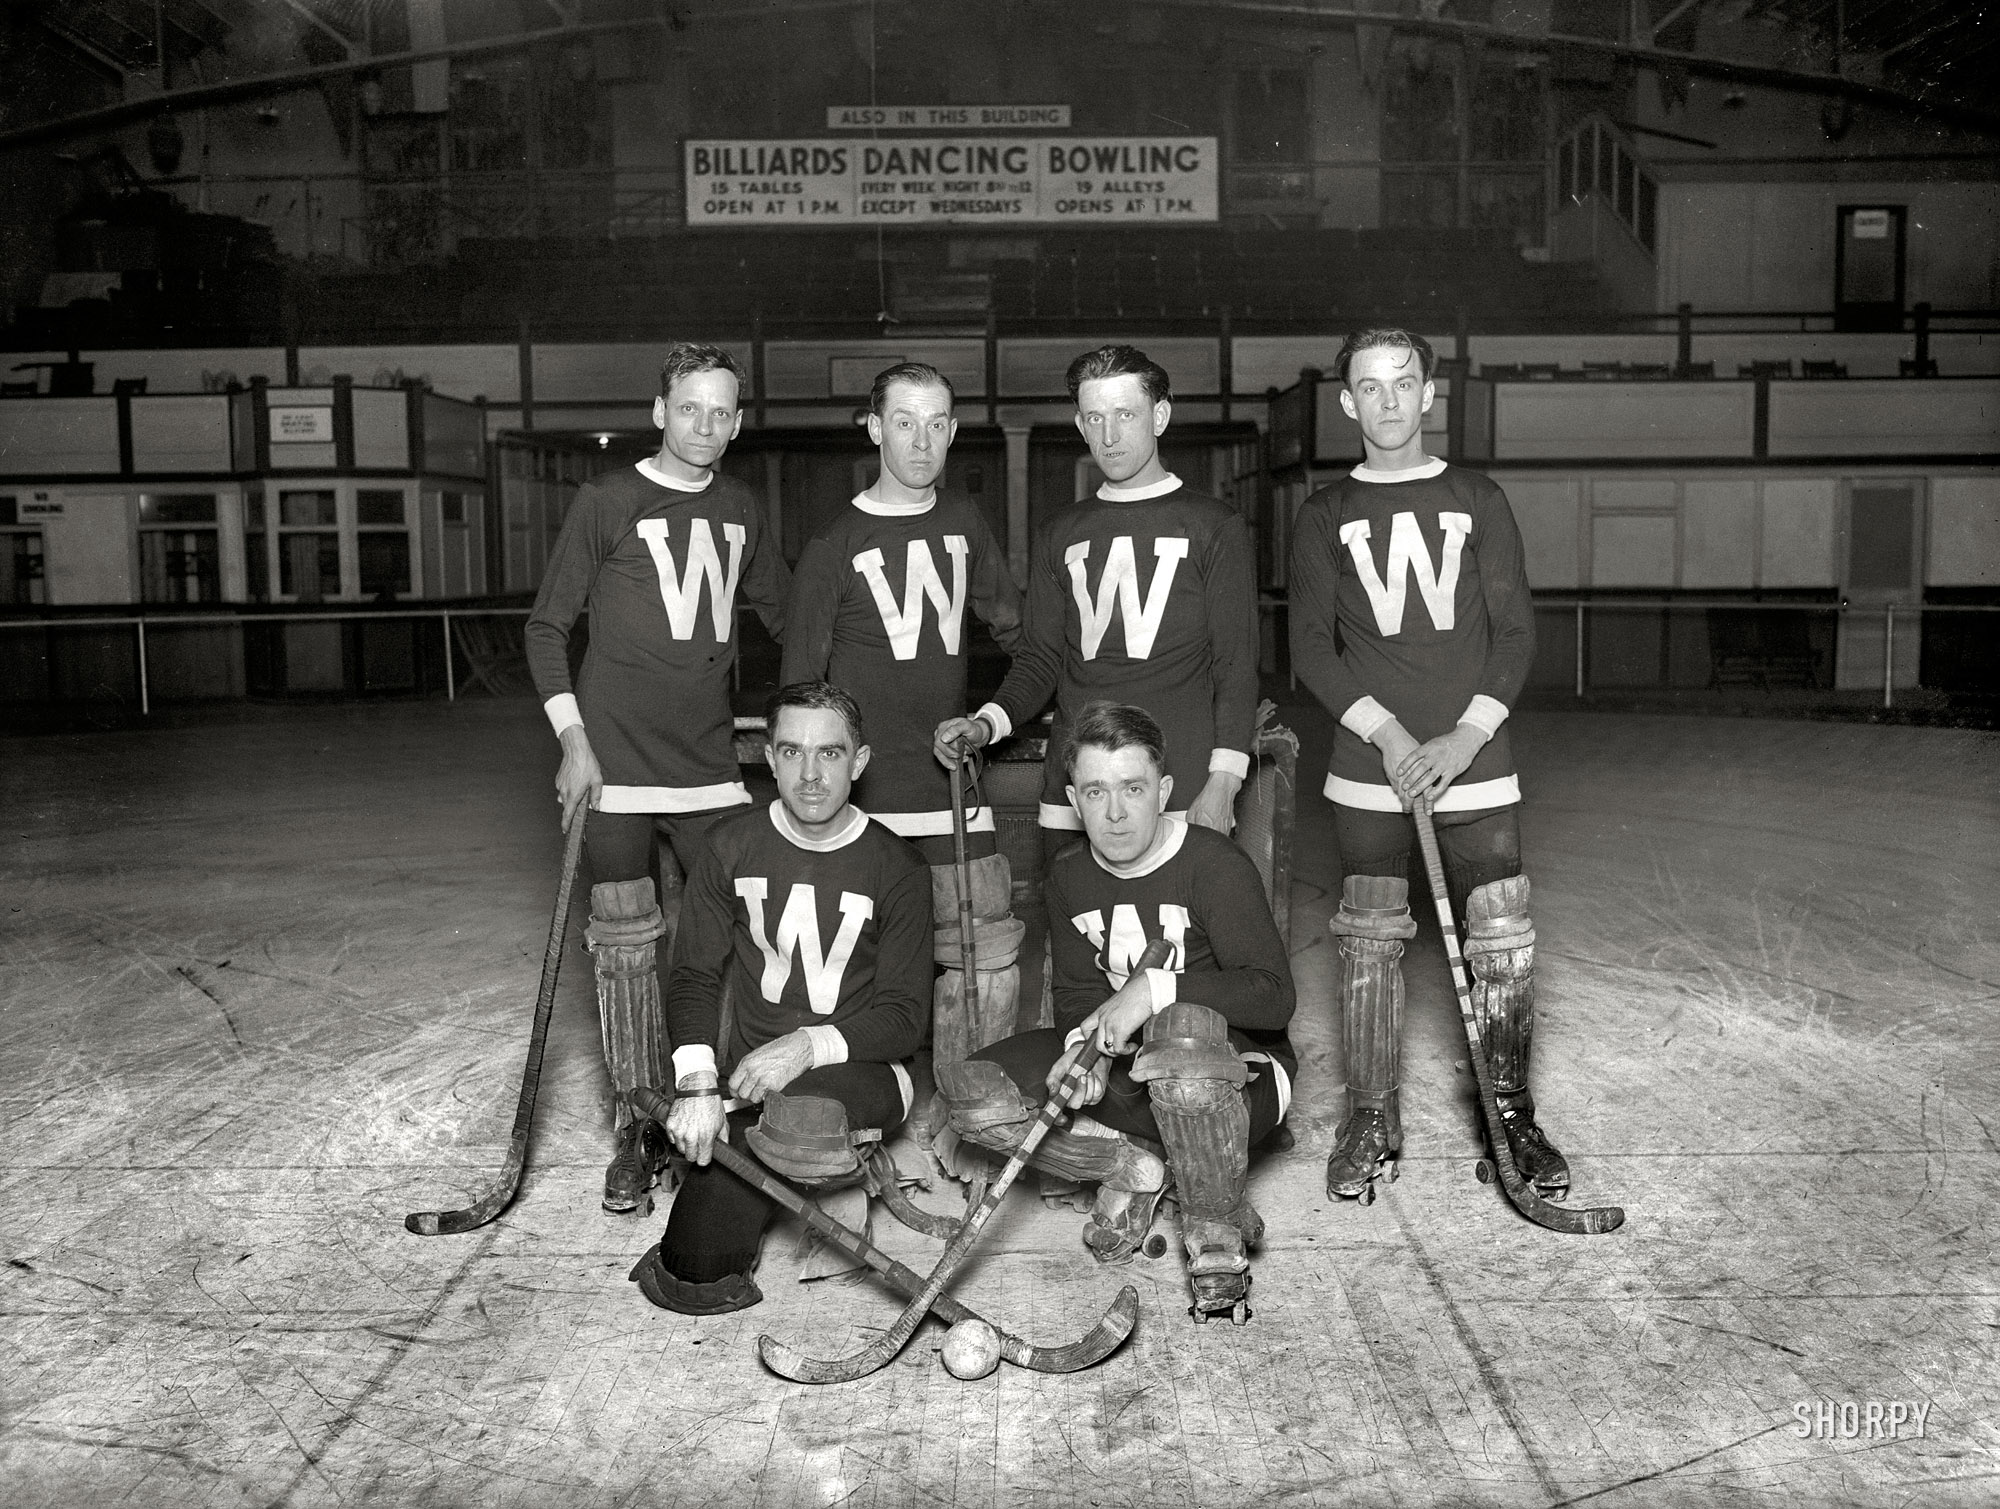 January 22, 1926. Washington, D.C. "Arcade Hockey Club." And if roller hockey isn't your cup of tea, we also have Billiards Dancing Bowling. View full size.